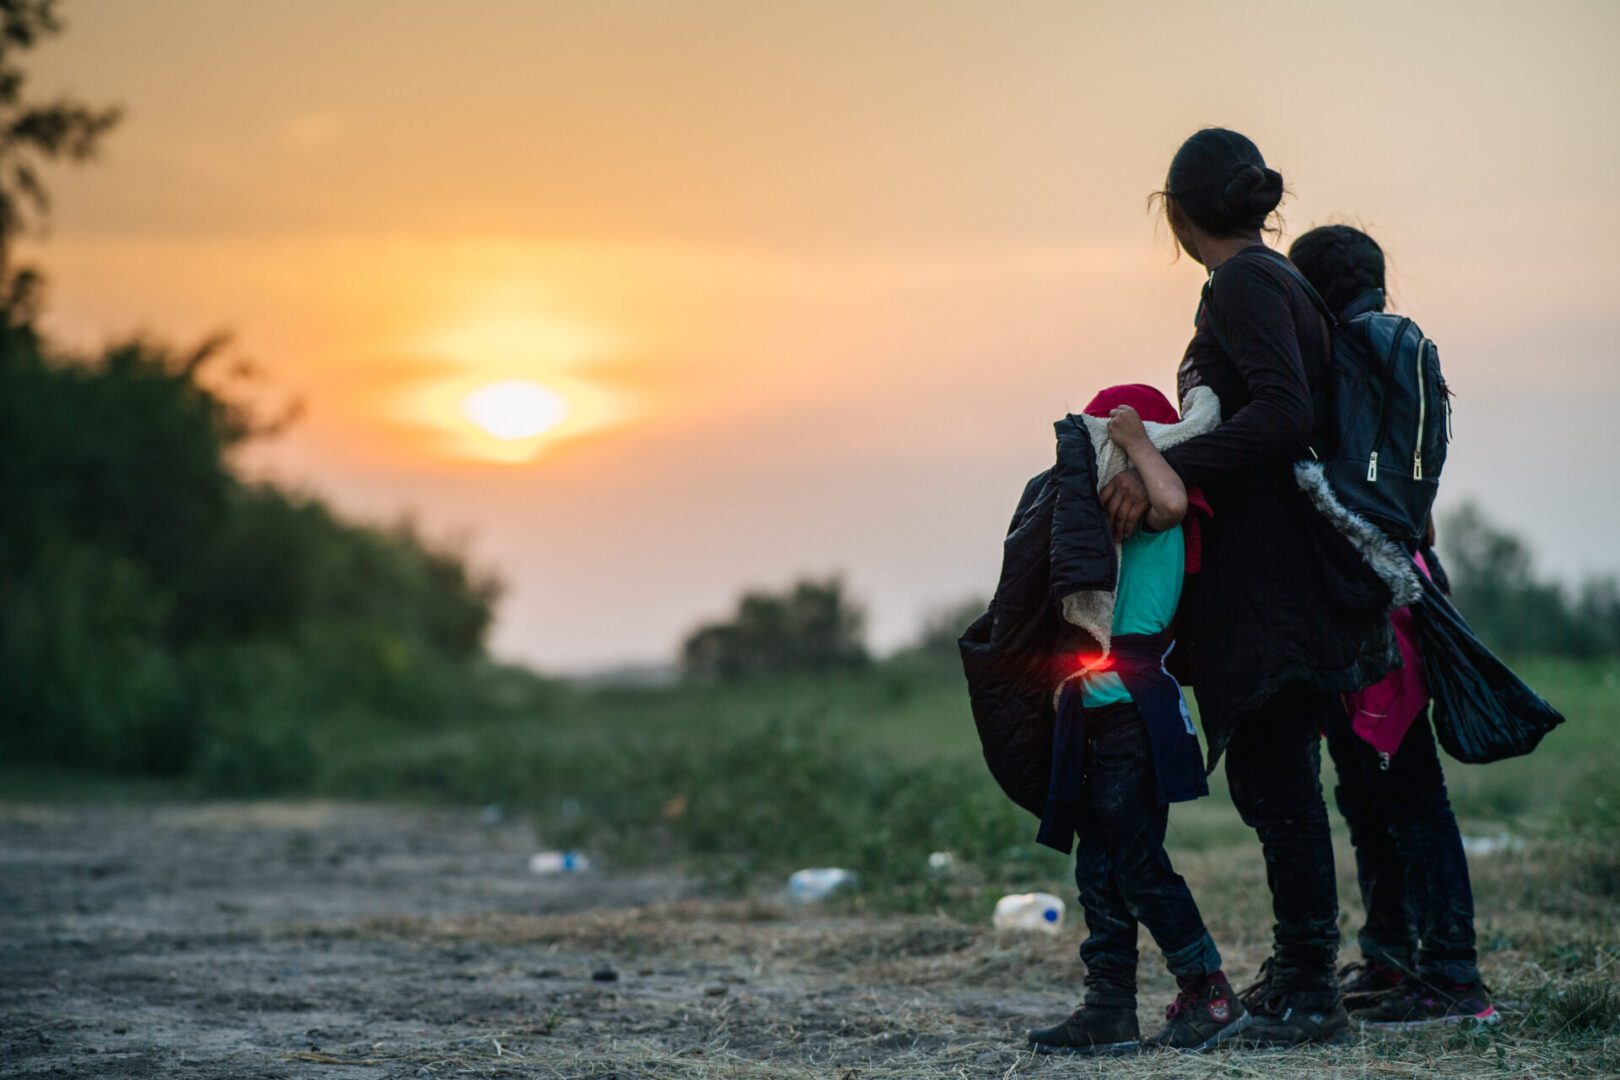 A migrant family watches the sunset while waiting to be accounted for and taken to a border patrol processing facility after crossing the Rio Grande into the U.S. on June 21, 2021 in La Joya, Texas. A surge of mostly Central American immigrants crossing into the United States has challenged U.S. immigration agencies along the U.S. Southern border.